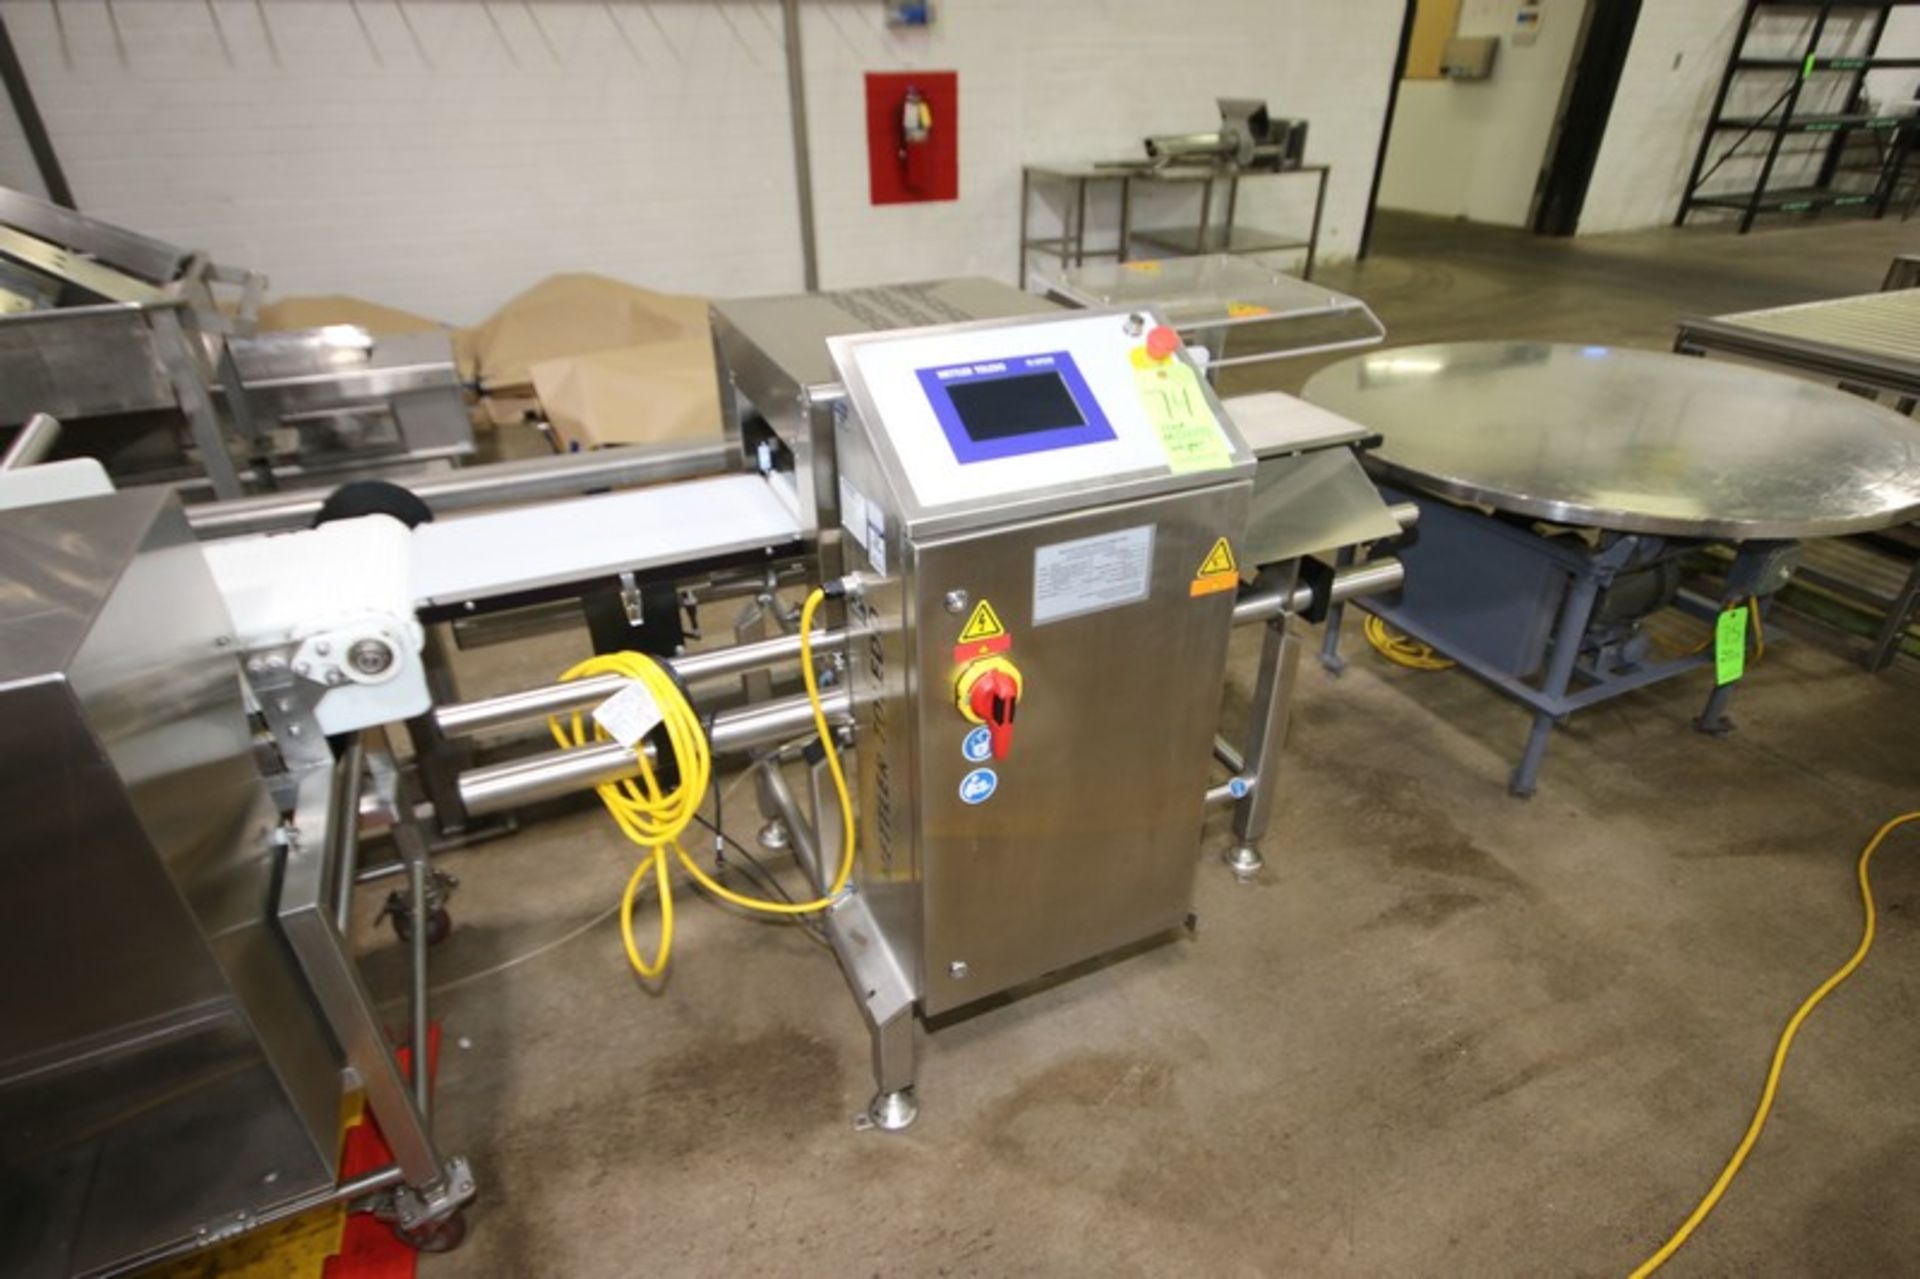 2020 Mettler Toledo Check Weigher, M/N C3130, S/N C04410302020, 115/230 Volts, 1 Phase, with Display